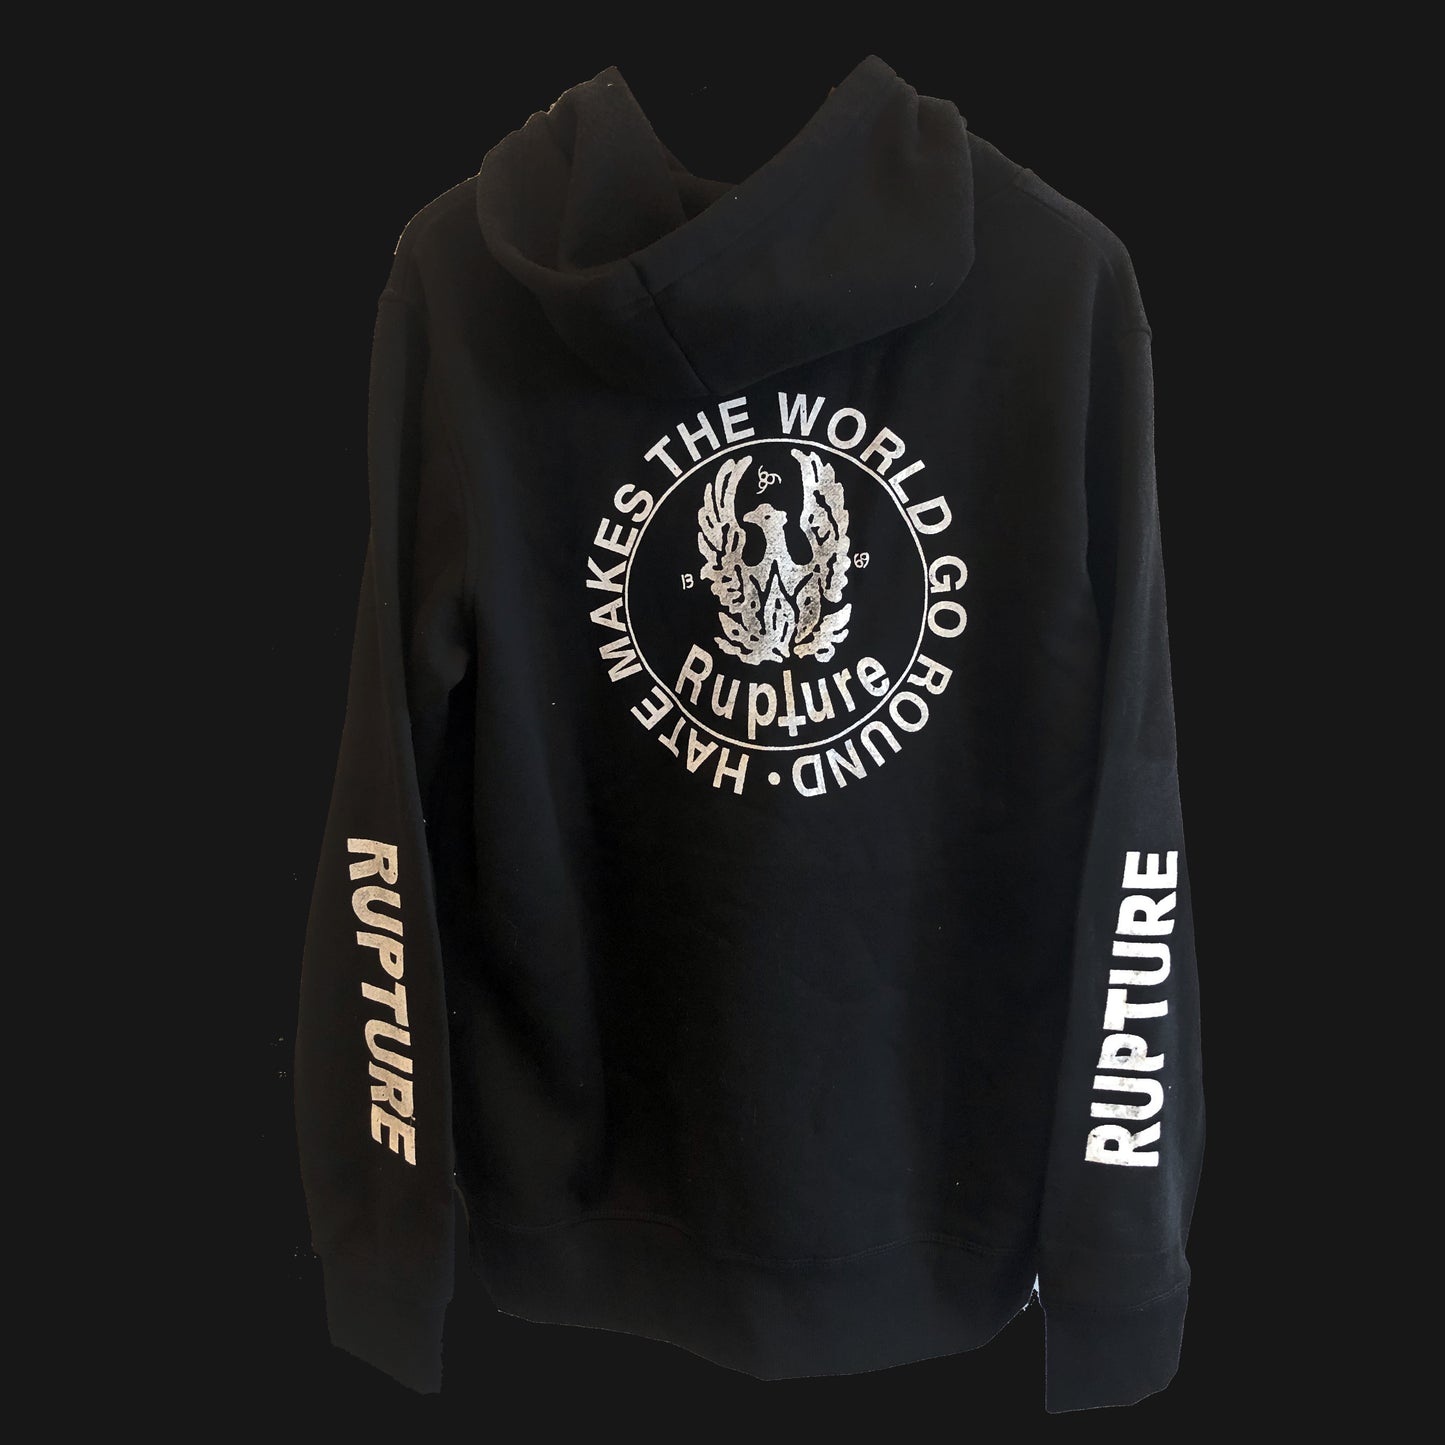 RUPTURE - "HATE MAKES THE WORLD" HOODIE